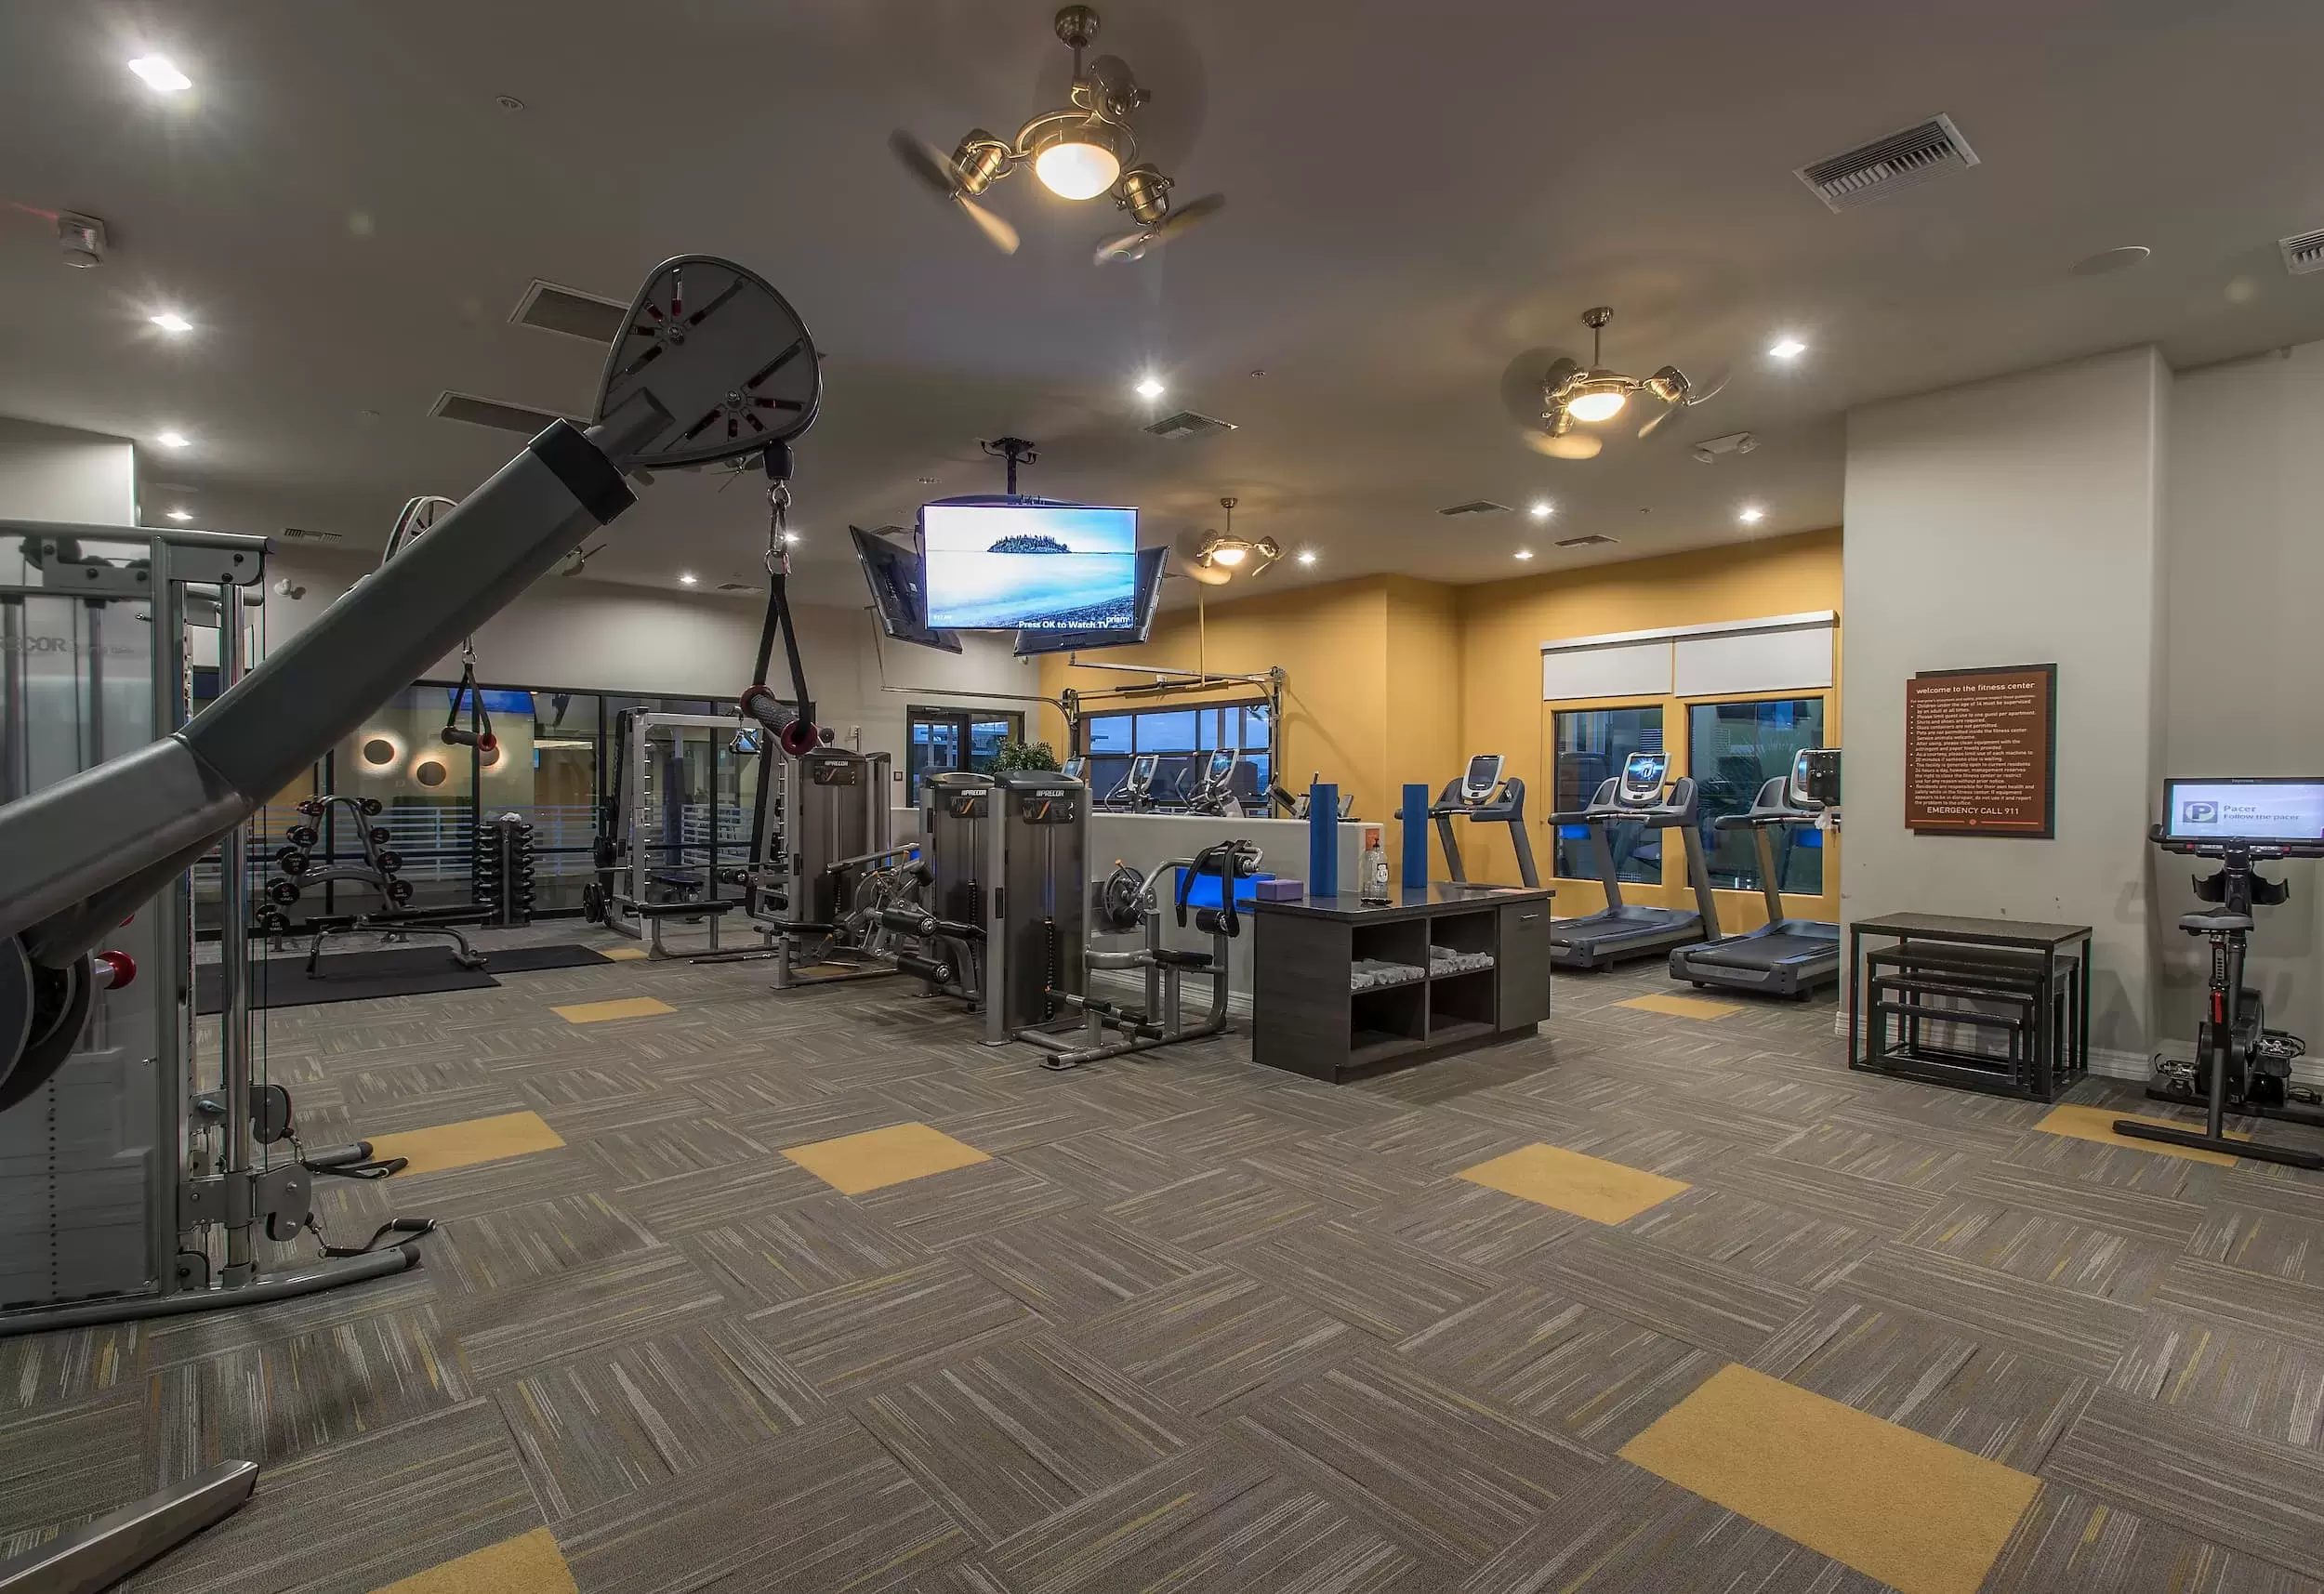 A view of the gym at Liv Northgate, with a variety of exercise machines and weights.